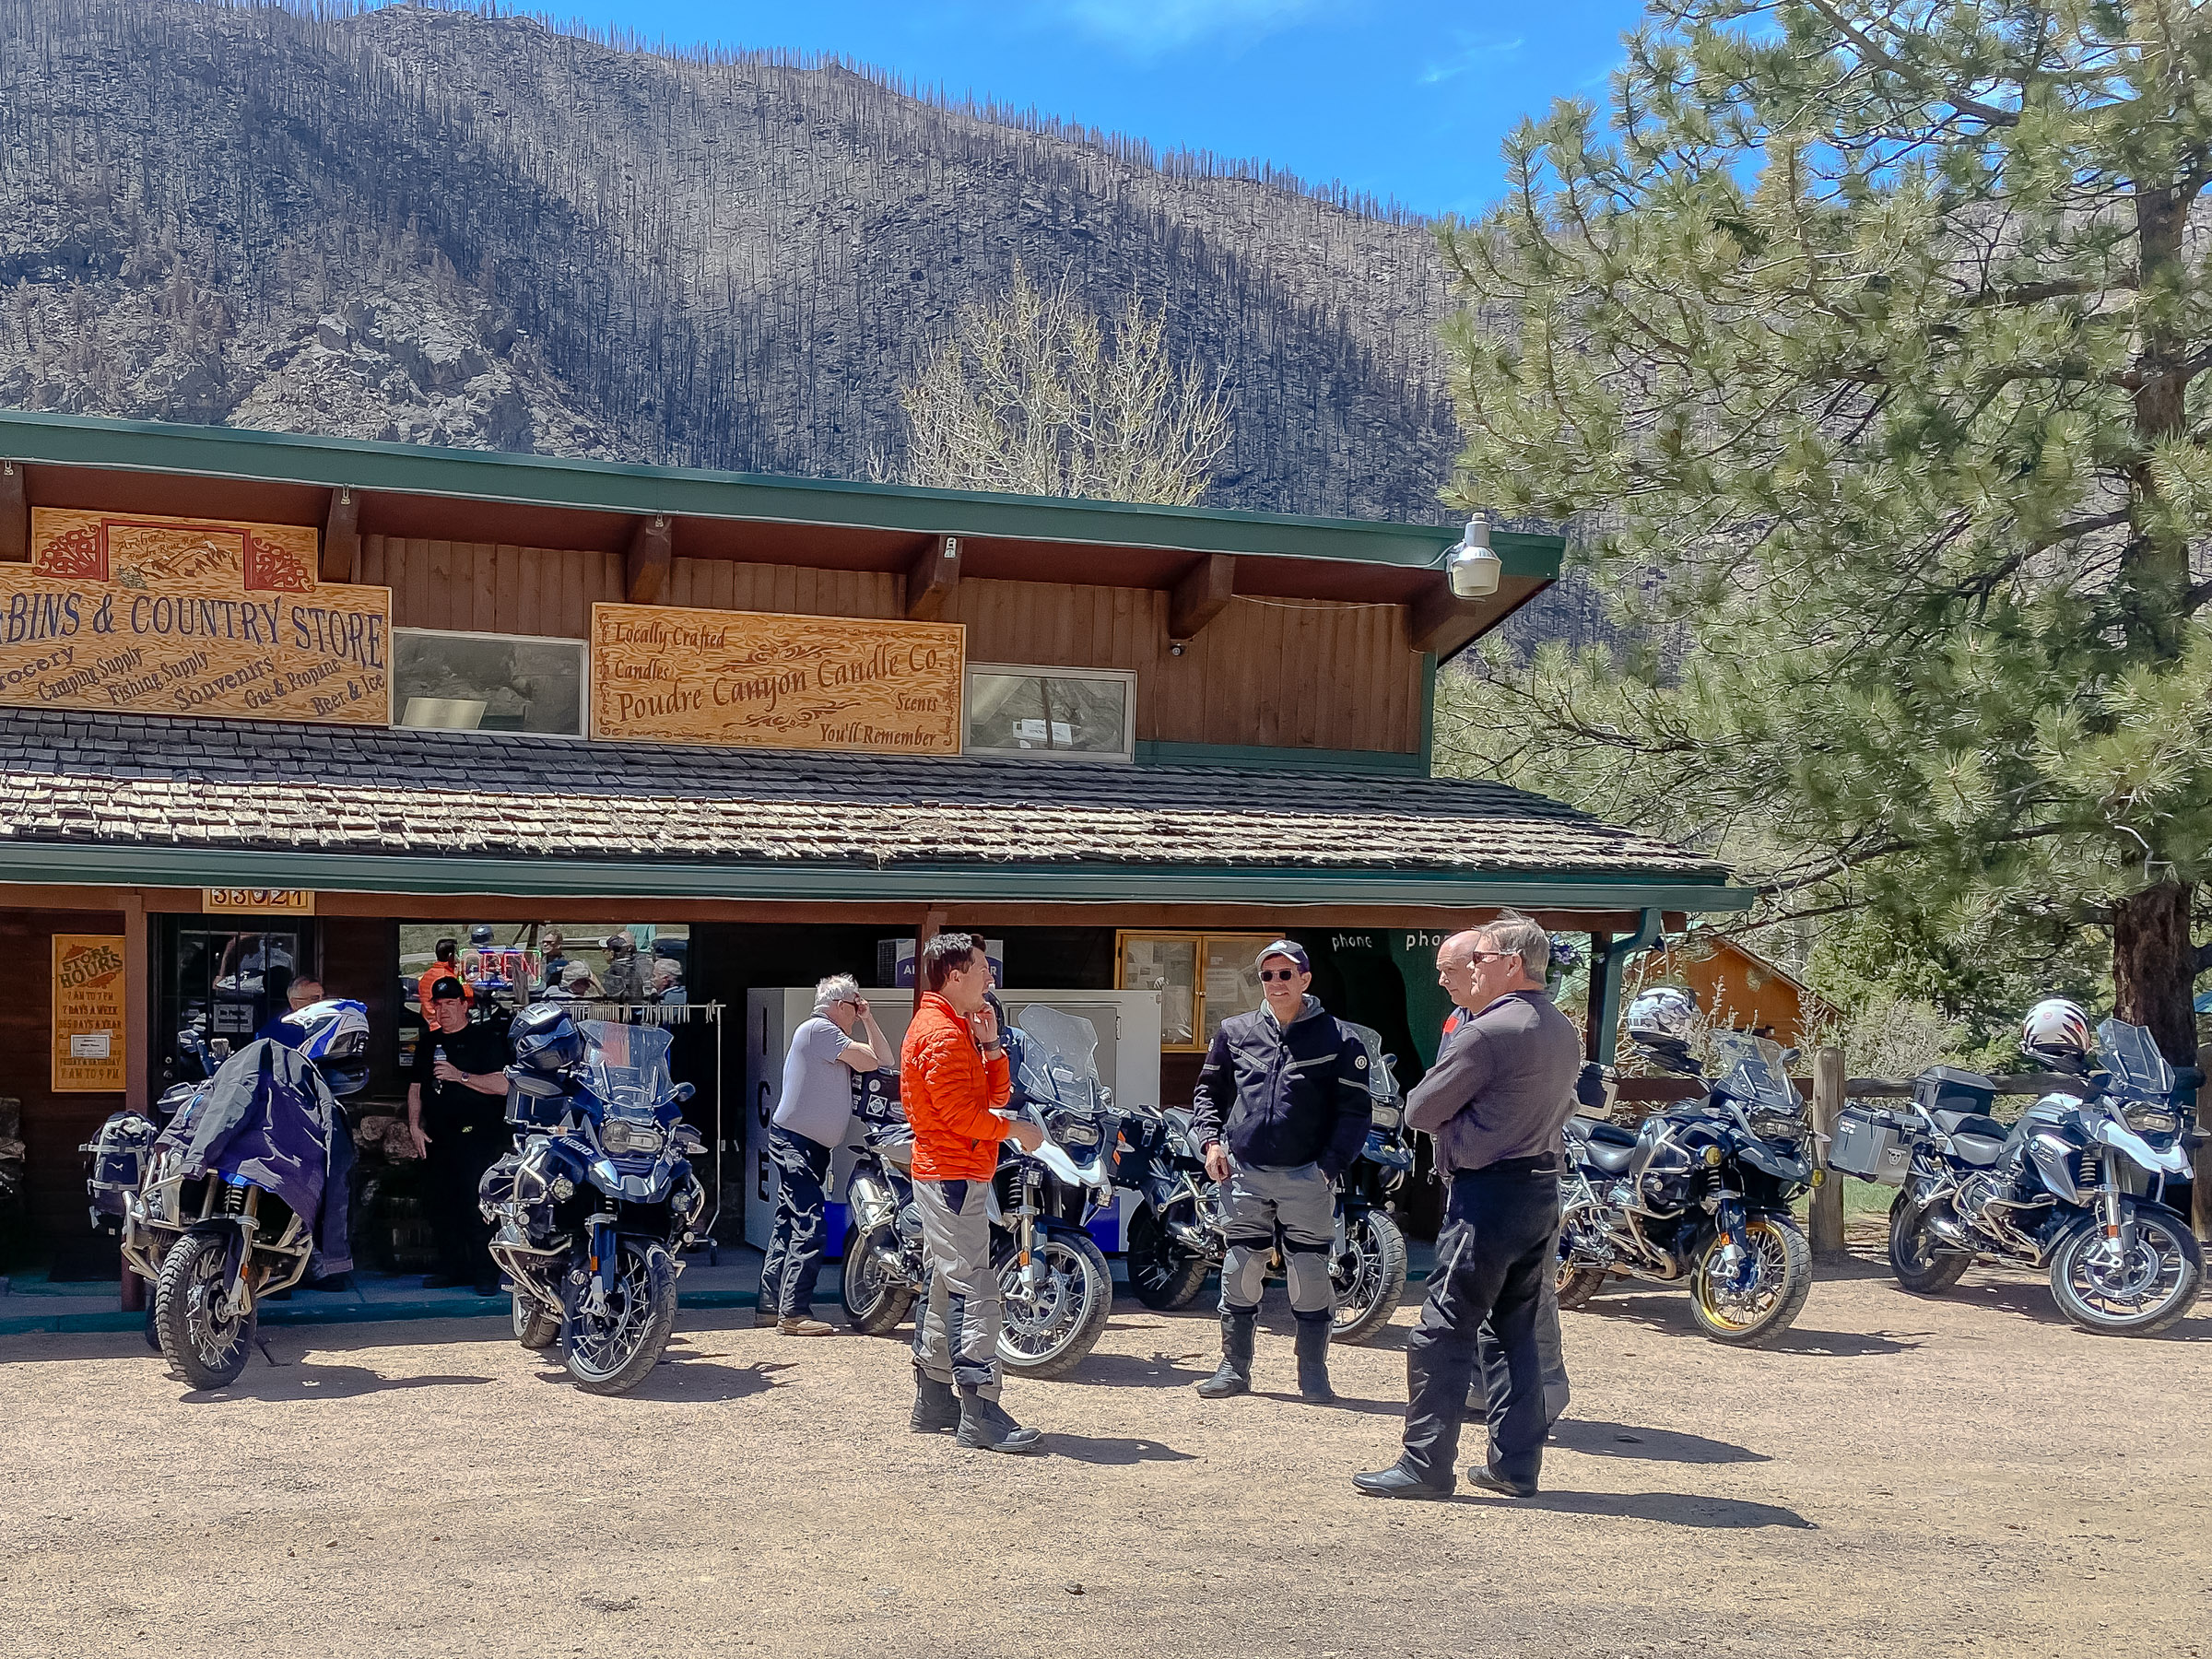 We had a great day of riding around Horse Tooth Reservoir, through Masonville, up Buckhorn road over Rist Canyon and along 14 / Poudre Canyon for a total of 77 miles.